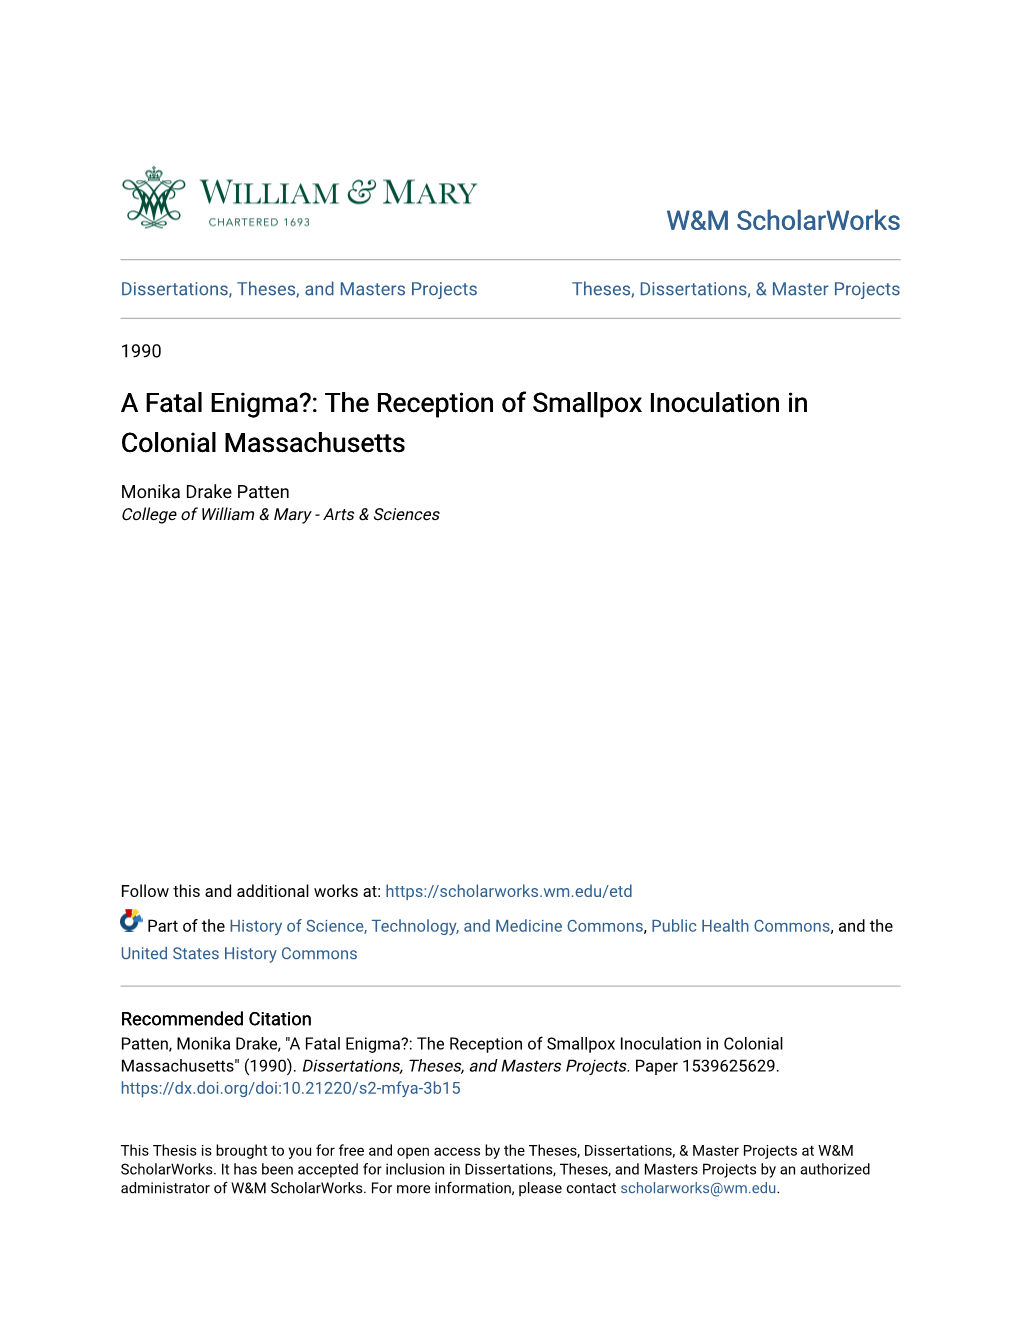 The Reception of Smallpox Inoculation in Colonial Massachusetts